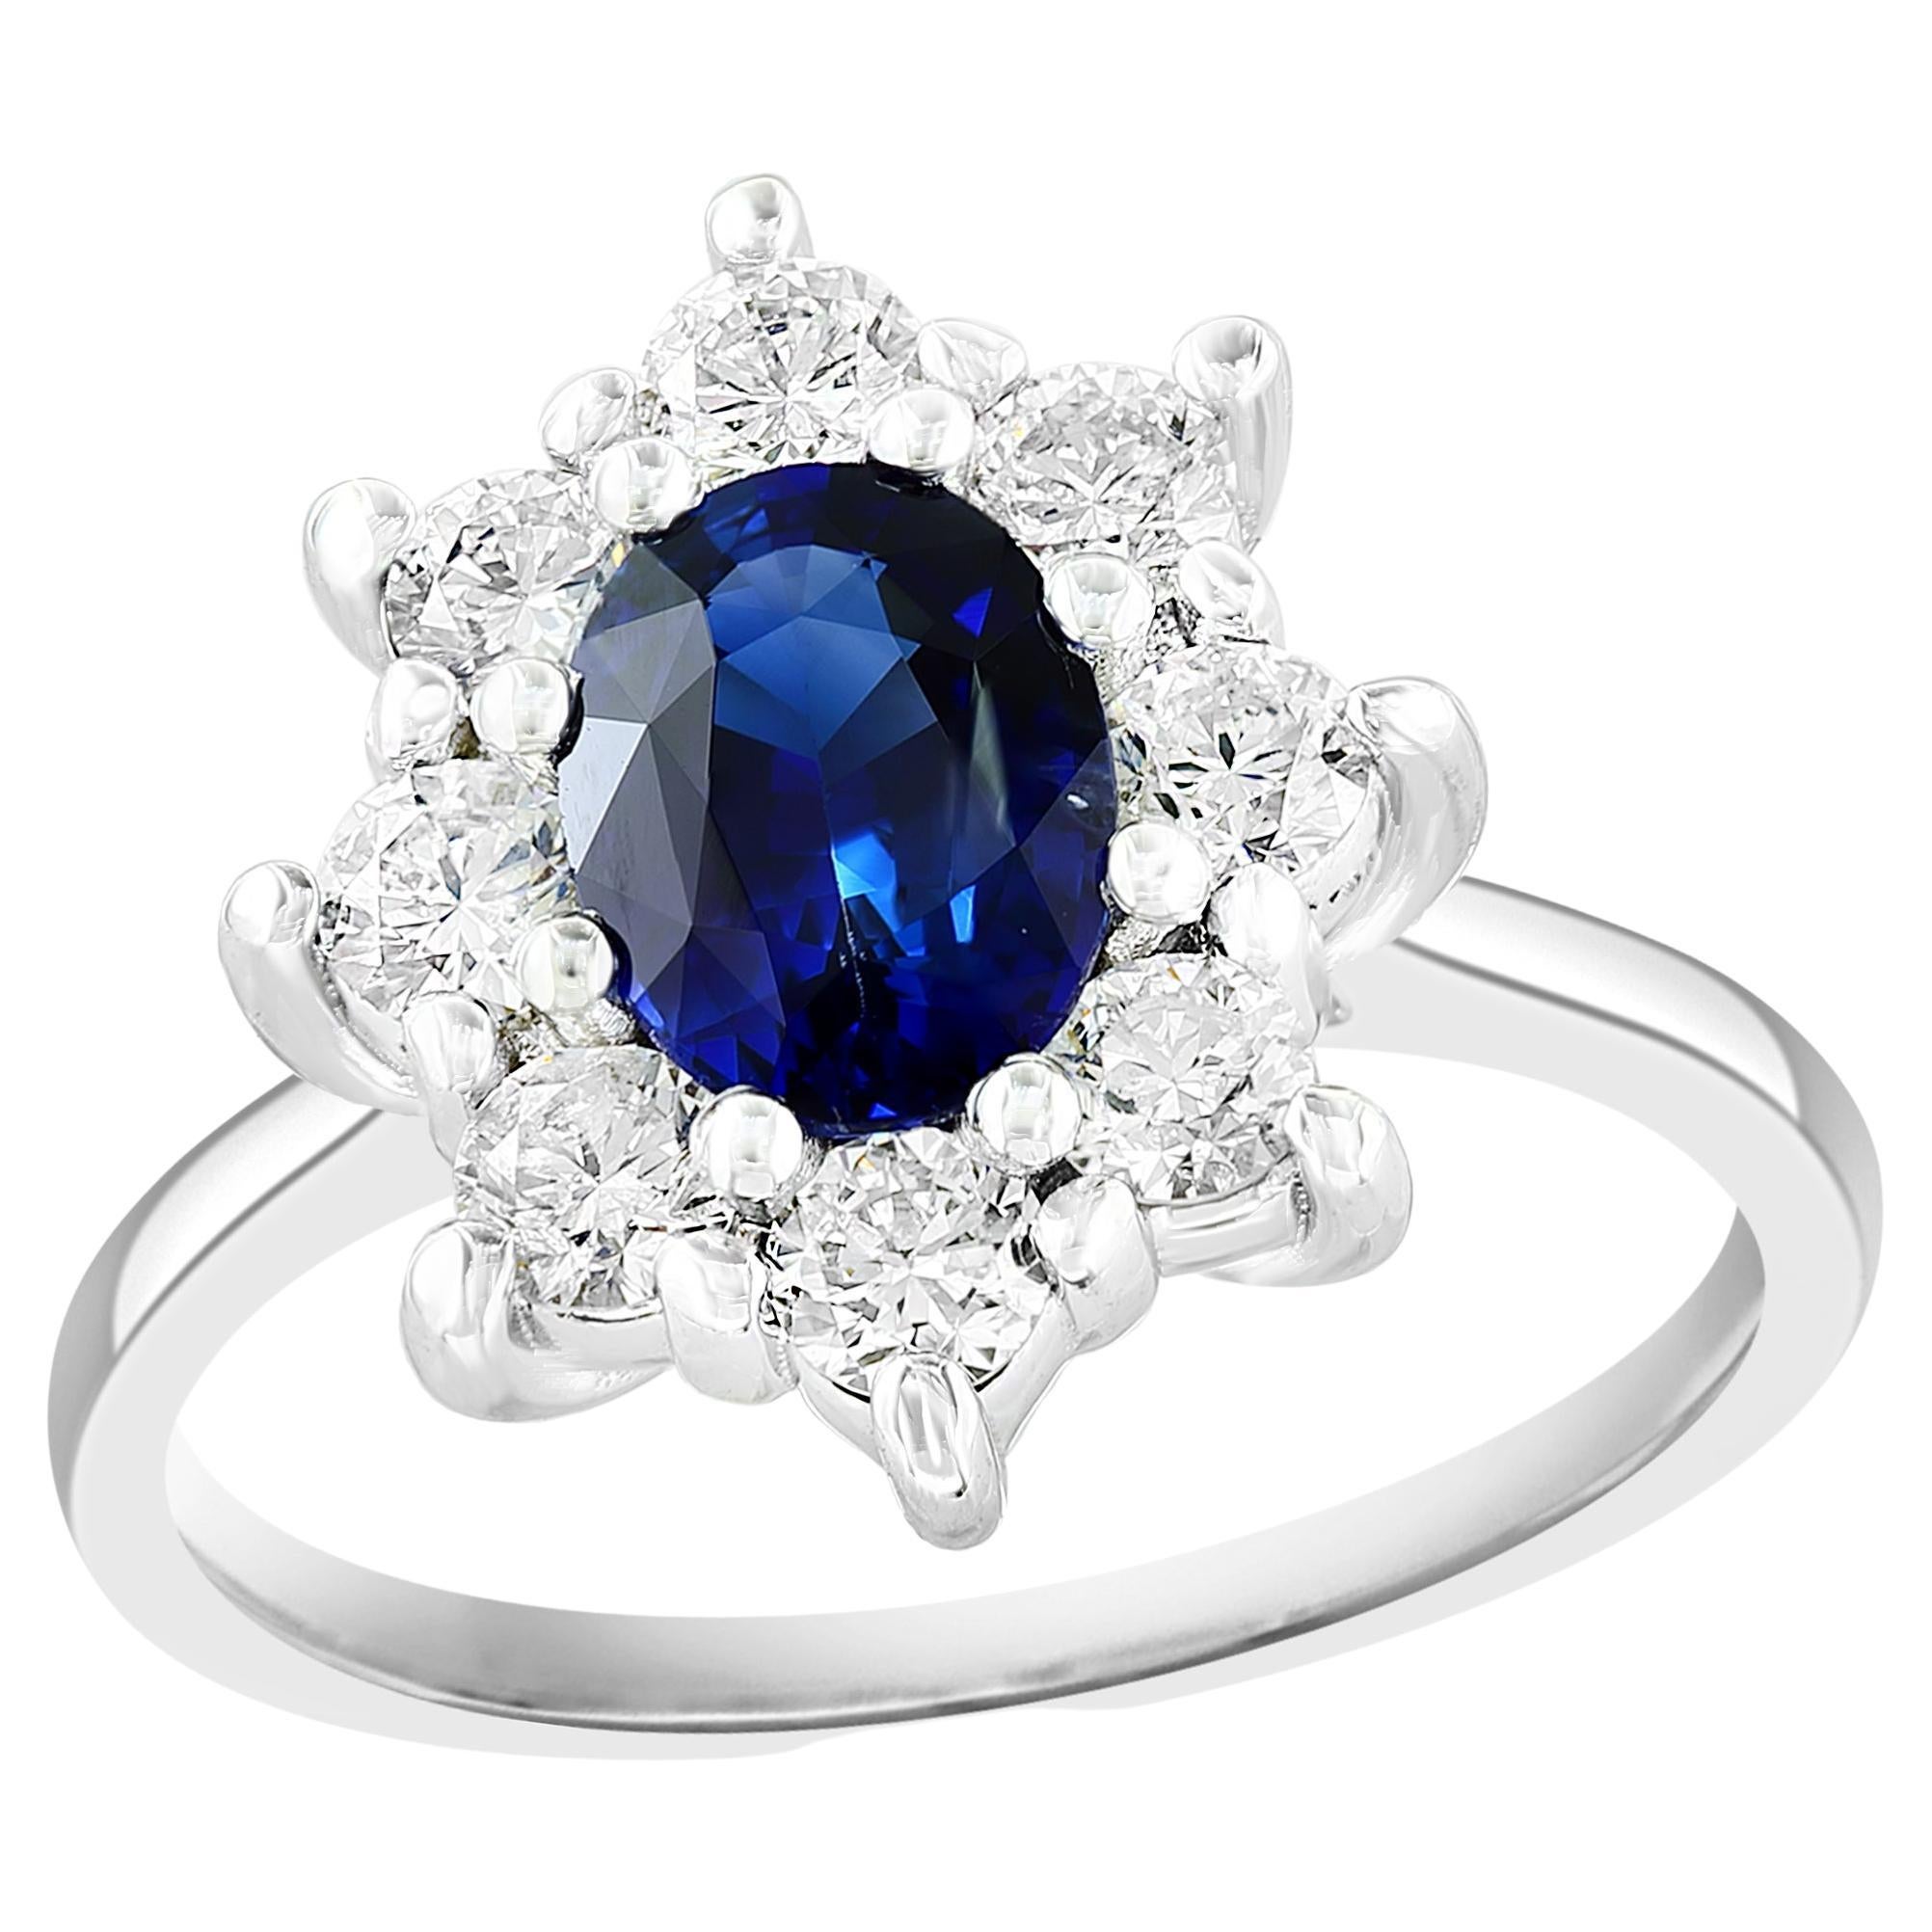 1.11 Carat Oval Cut Blue Sapphire and Diamond Ring in 14k White Gold For Sale